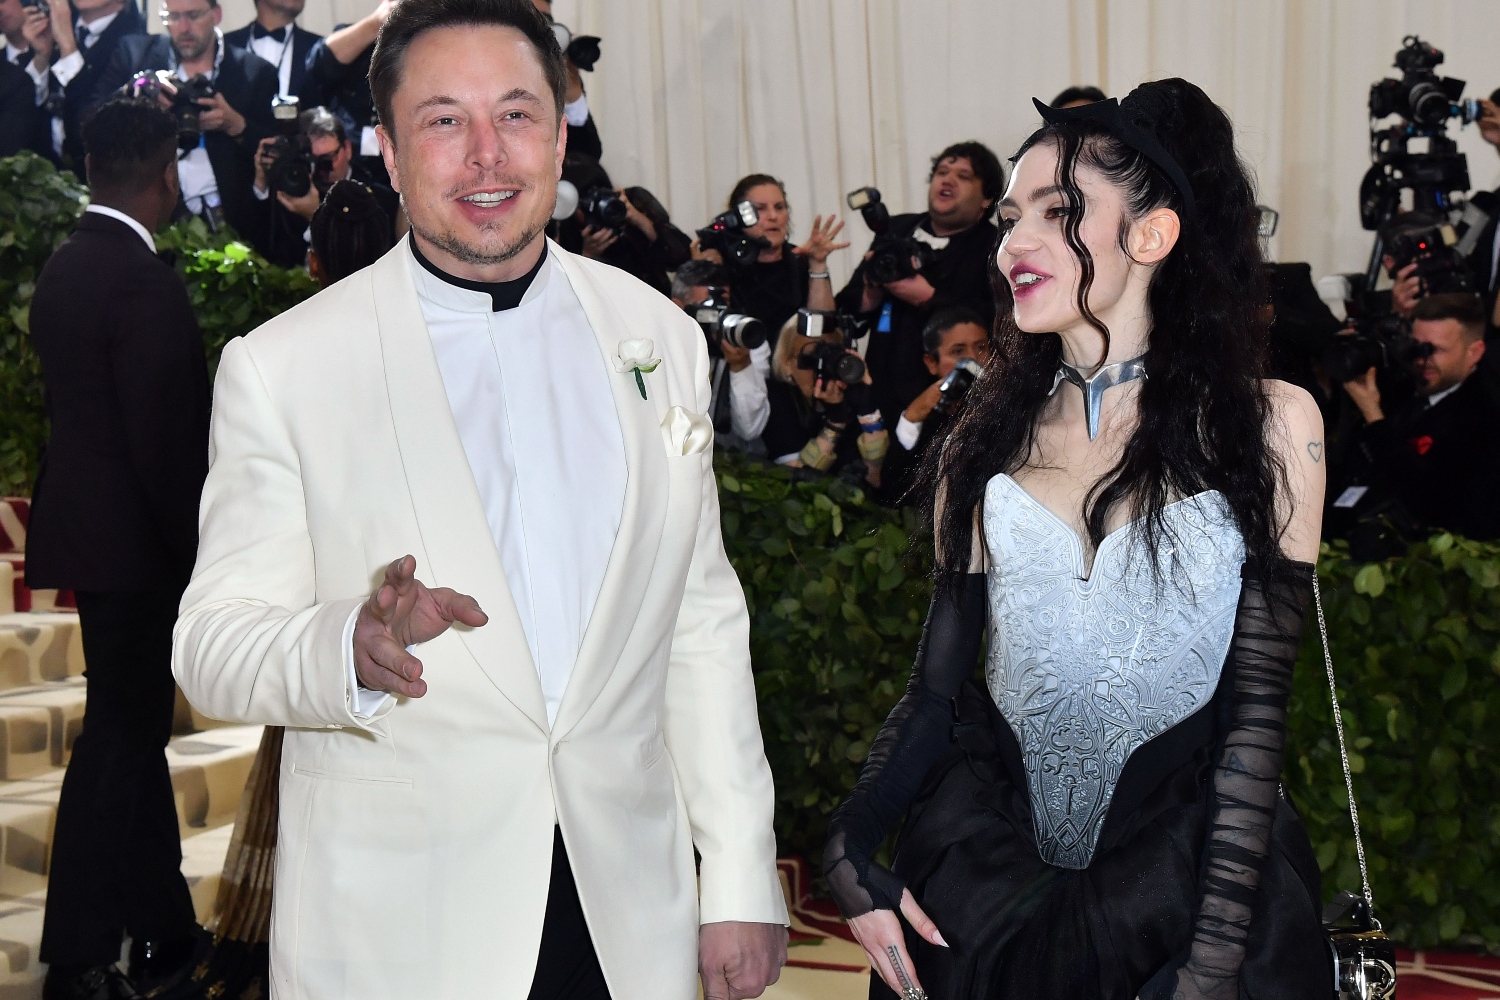 Elon Musk and Grimes at the 2018 Met Gala, where they made their public debut as a couple.